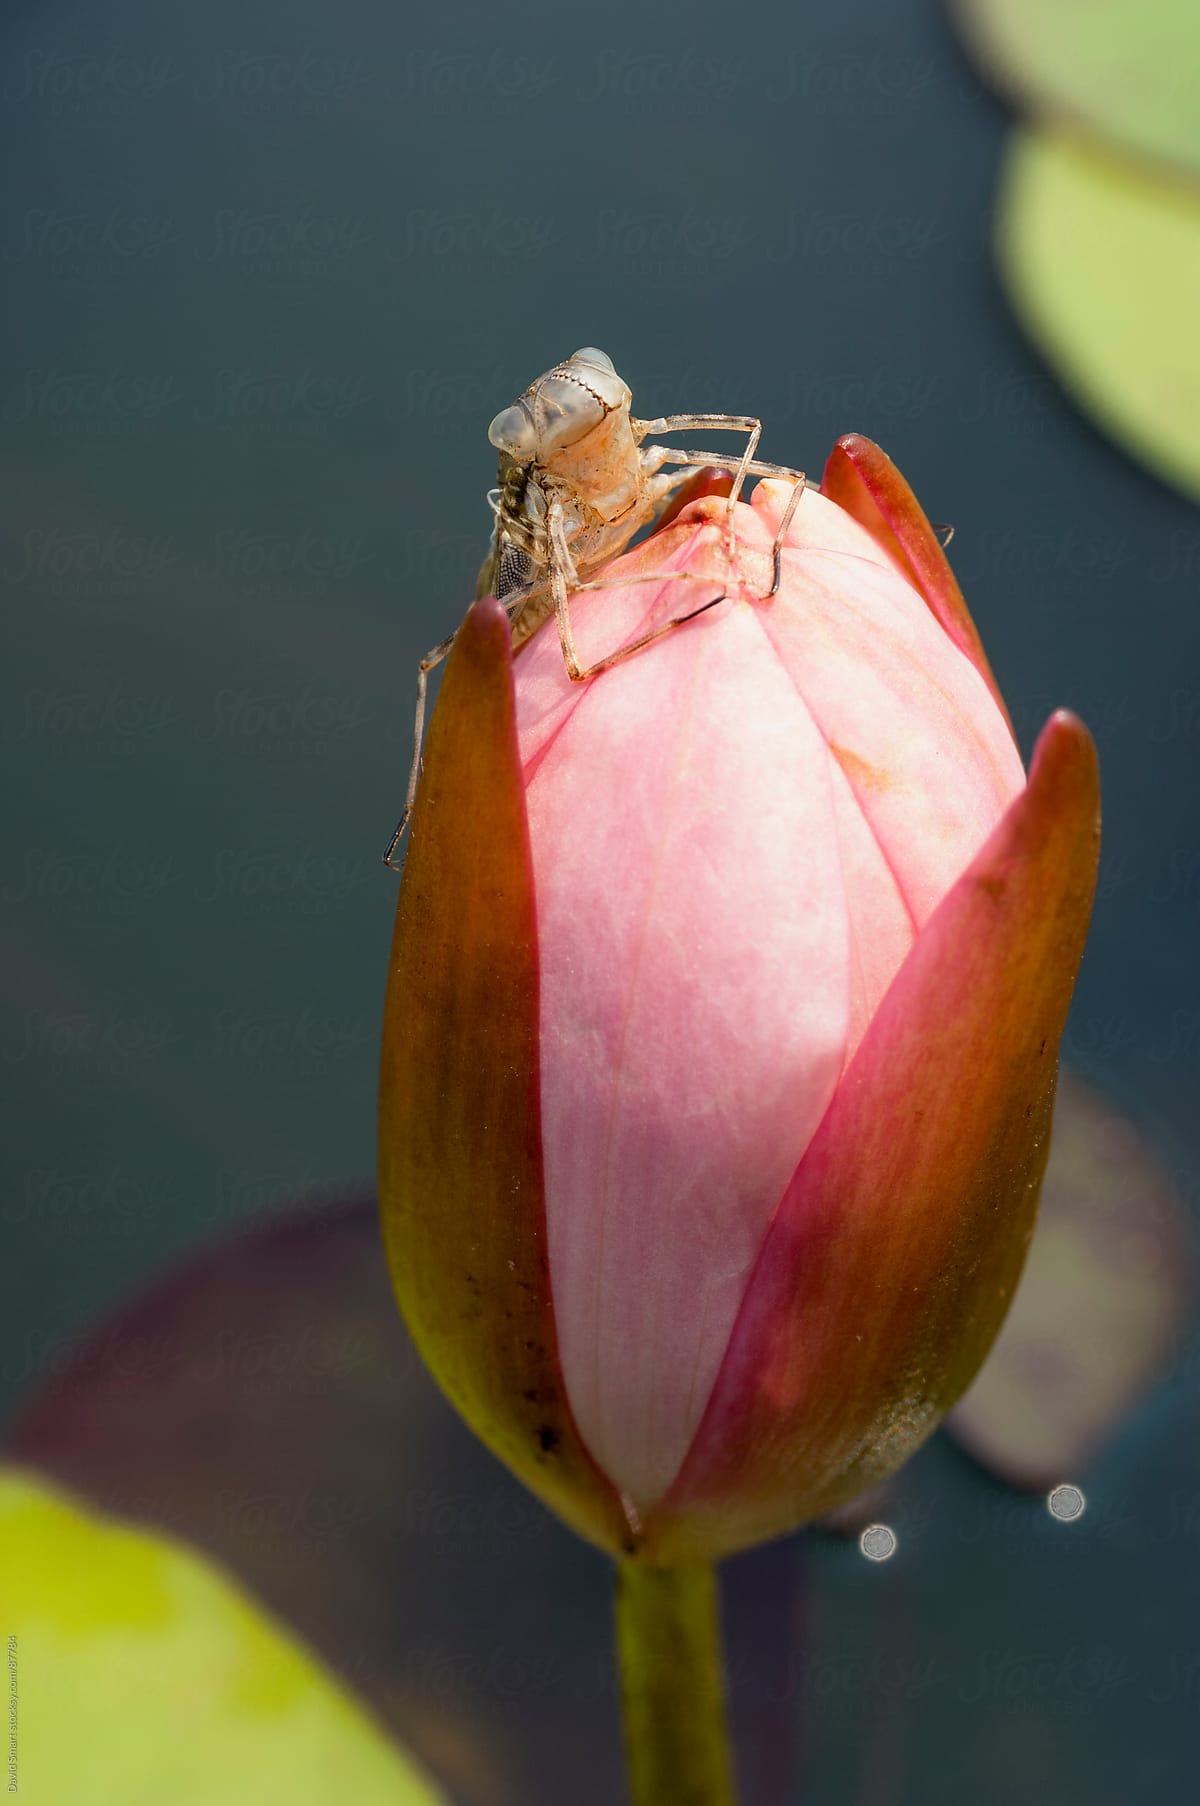 Dragonfly exuvia on a waterlily bud